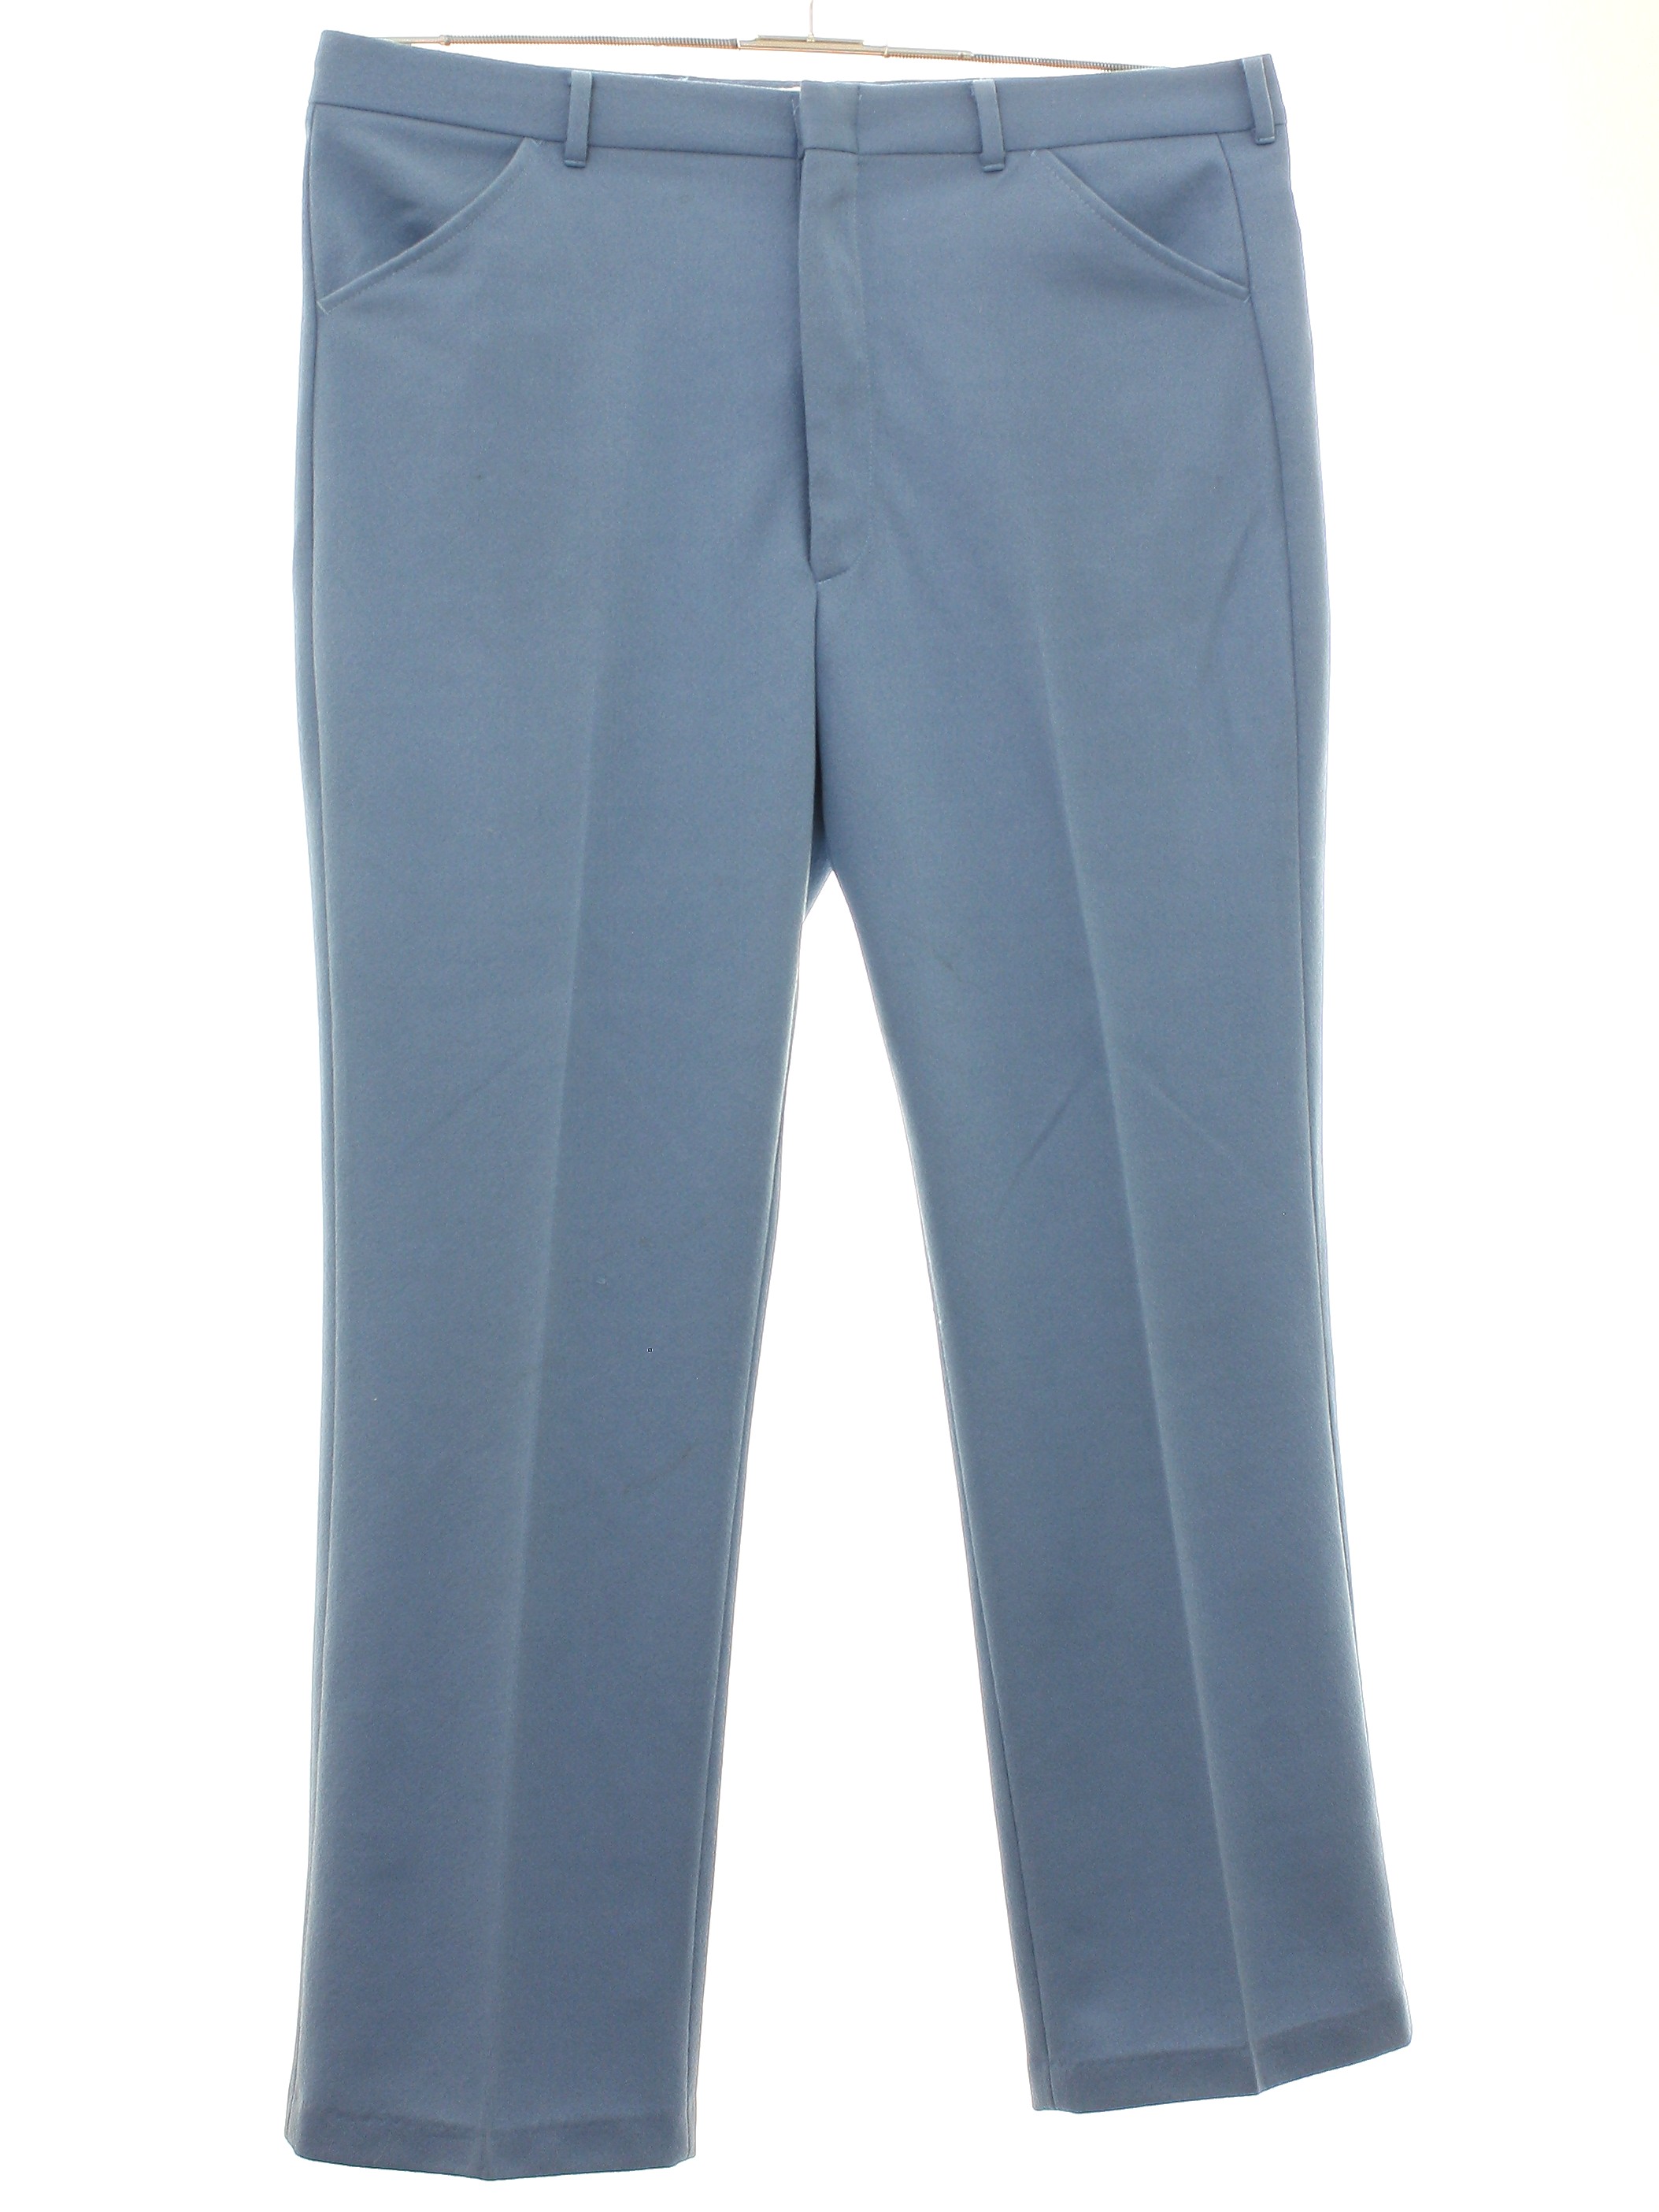 Retro 70's Pants: 70s -Haband- Mens baby blue polyester knit loose leg ...